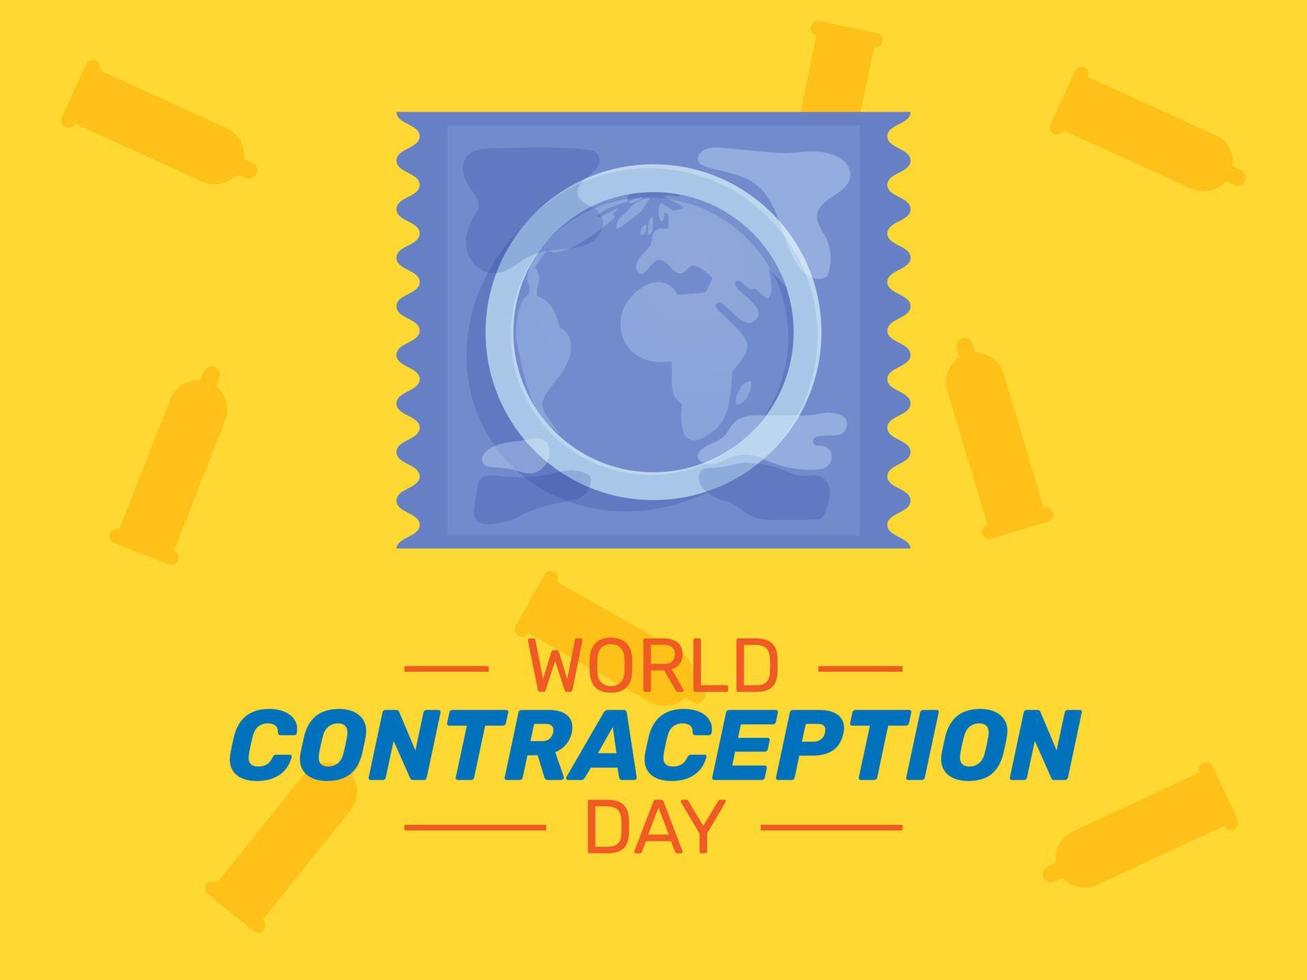 World Contraception Day Design, Sex Education for Sexual Health with Condom in package illustration vector